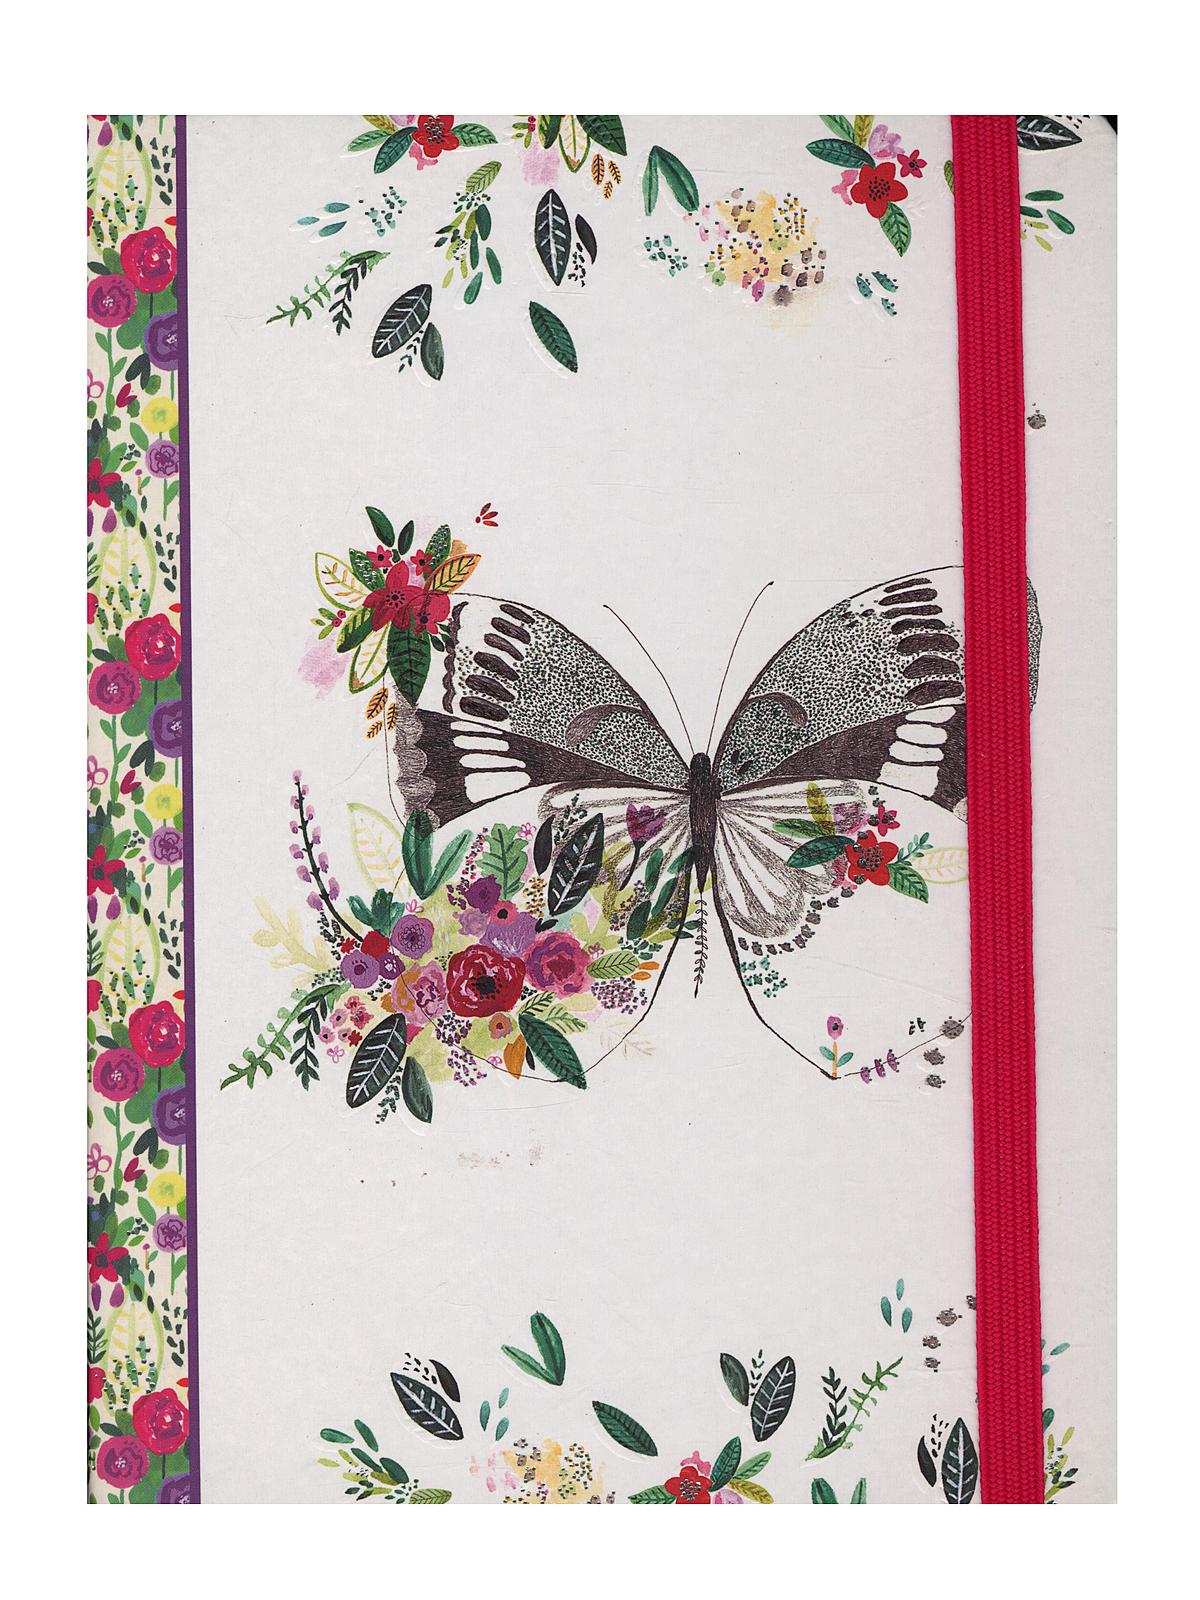 Mid-size Journals Butterfly Meadow 6 1 4 In. X 8 1 4 In. 160 Pages, Lined